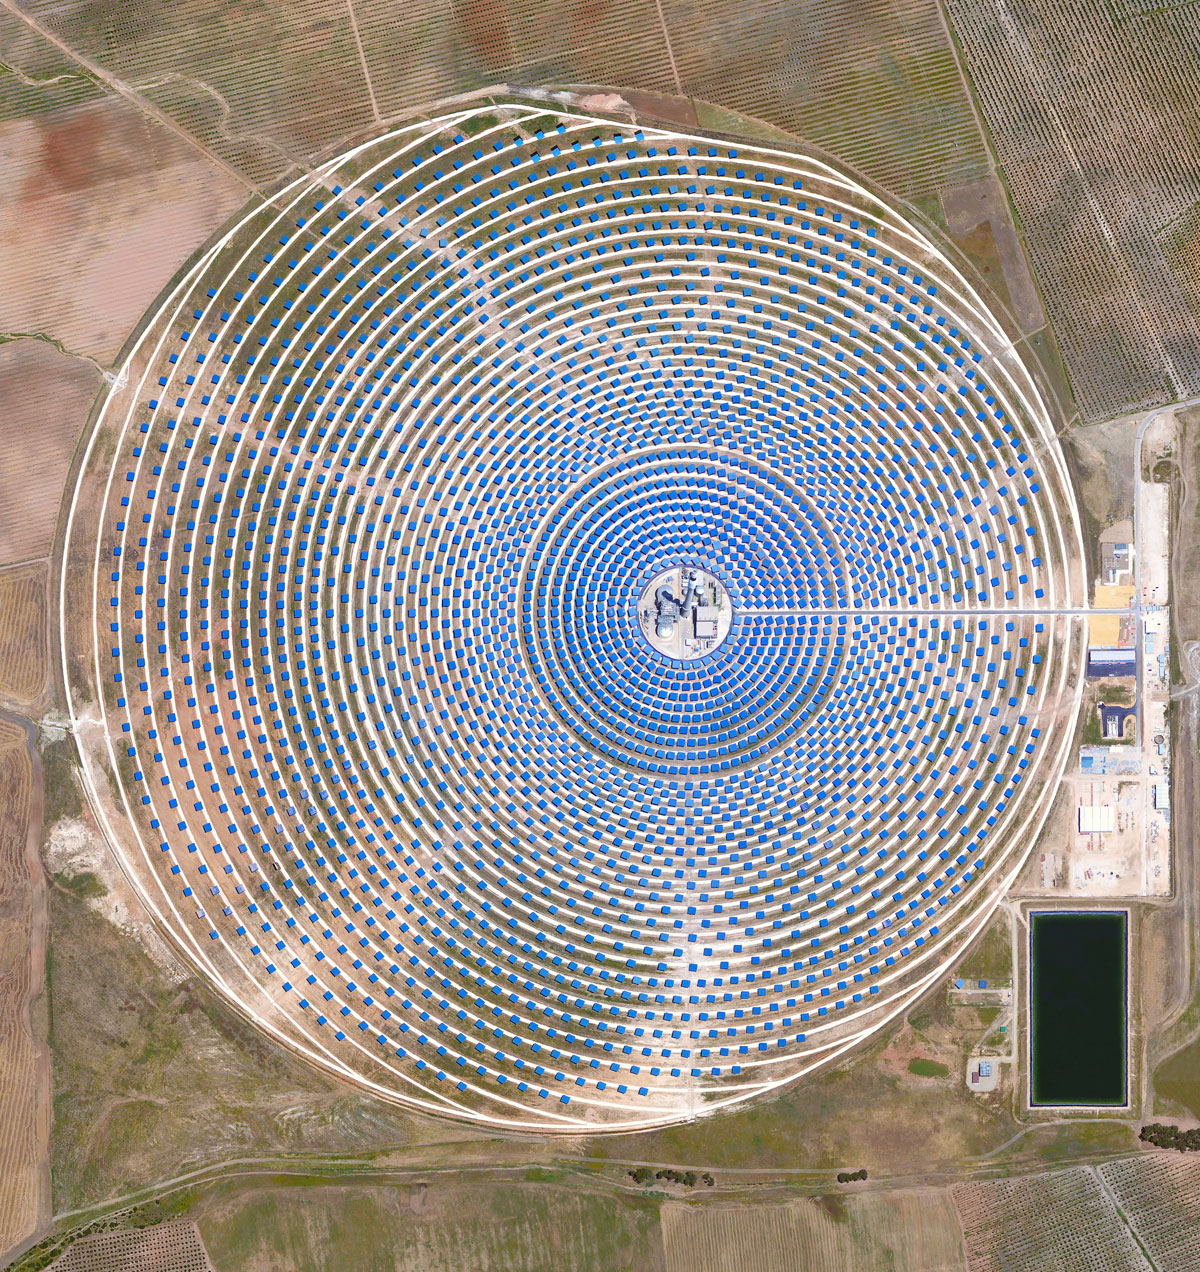 03 gemasolar thermosolar plant 15 High Res Photos That Will Give You a New Perspective on Earth